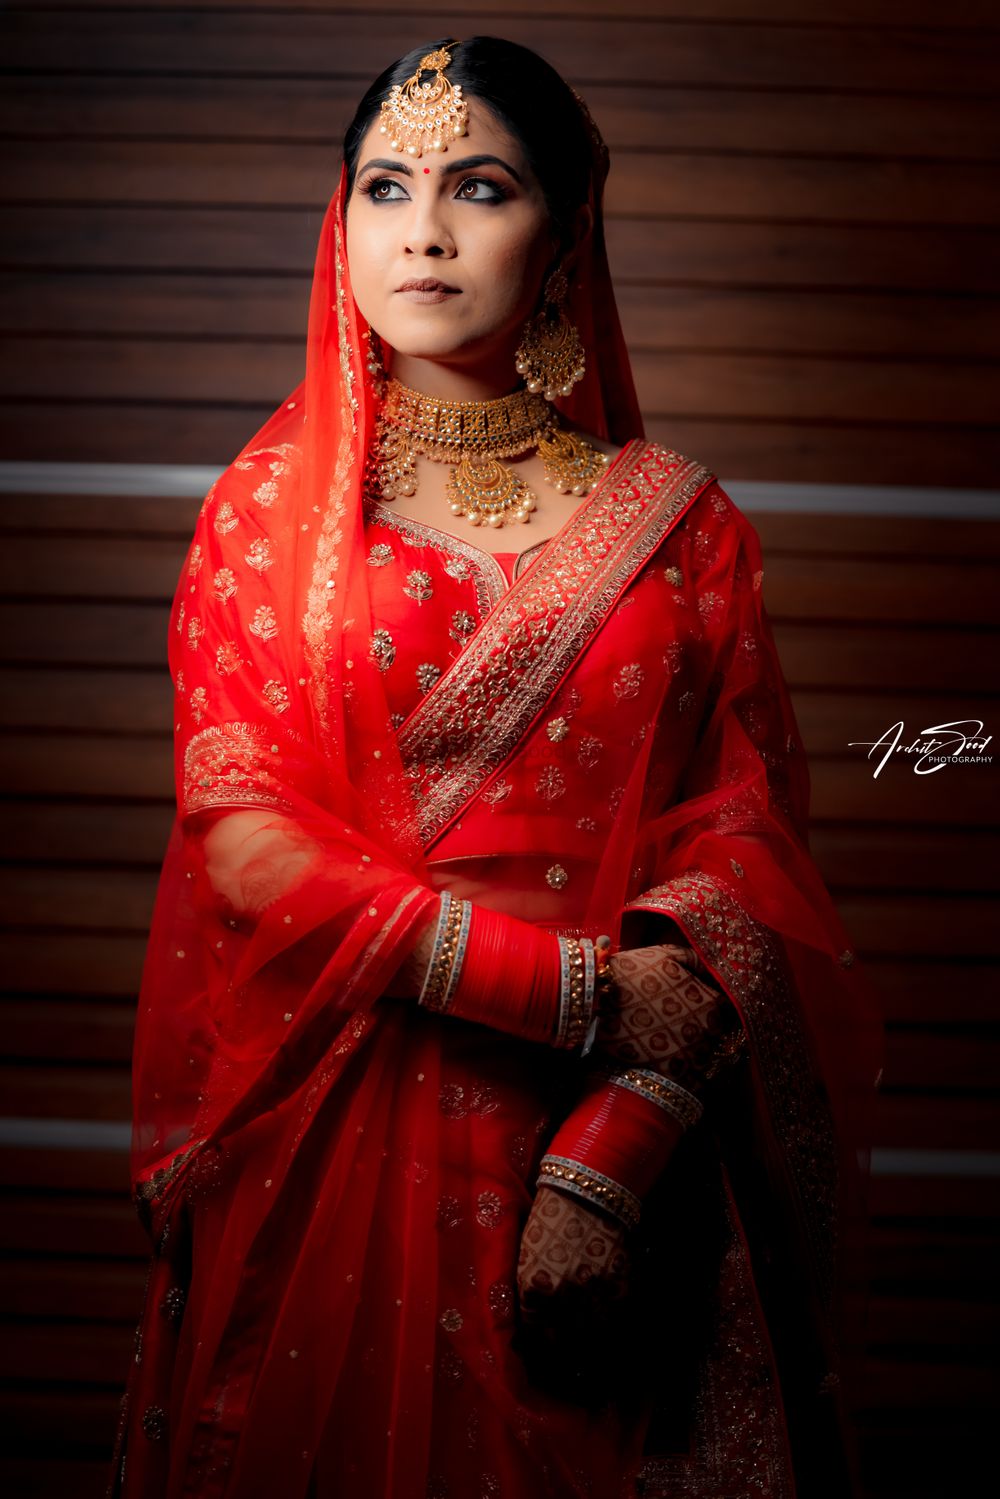 Photo From Apoorva Weda Aneesh - By Archit Sood Photography